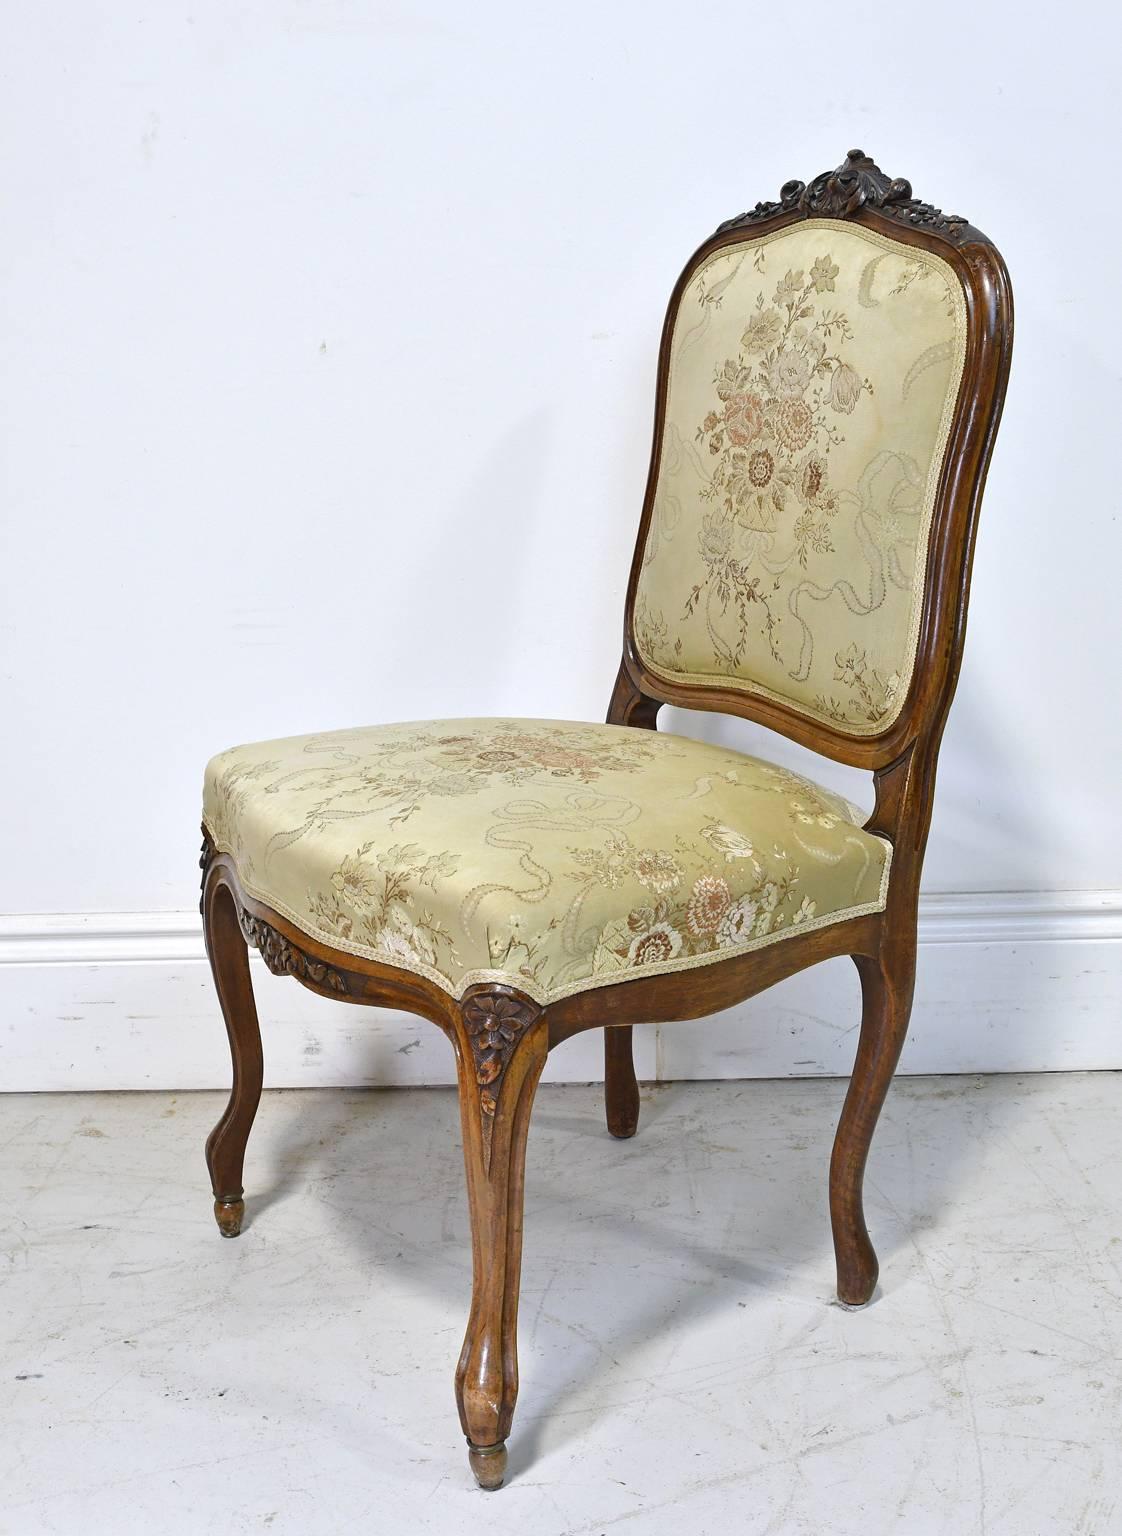 A very lovely Louis XV-style chair with walnut frame and upholstered seat & back. Features carvings of scallop & foliage along back crest, with carved flowers along apron and on the front knees of the carved cabriole legs. France, circa 1860. 19th